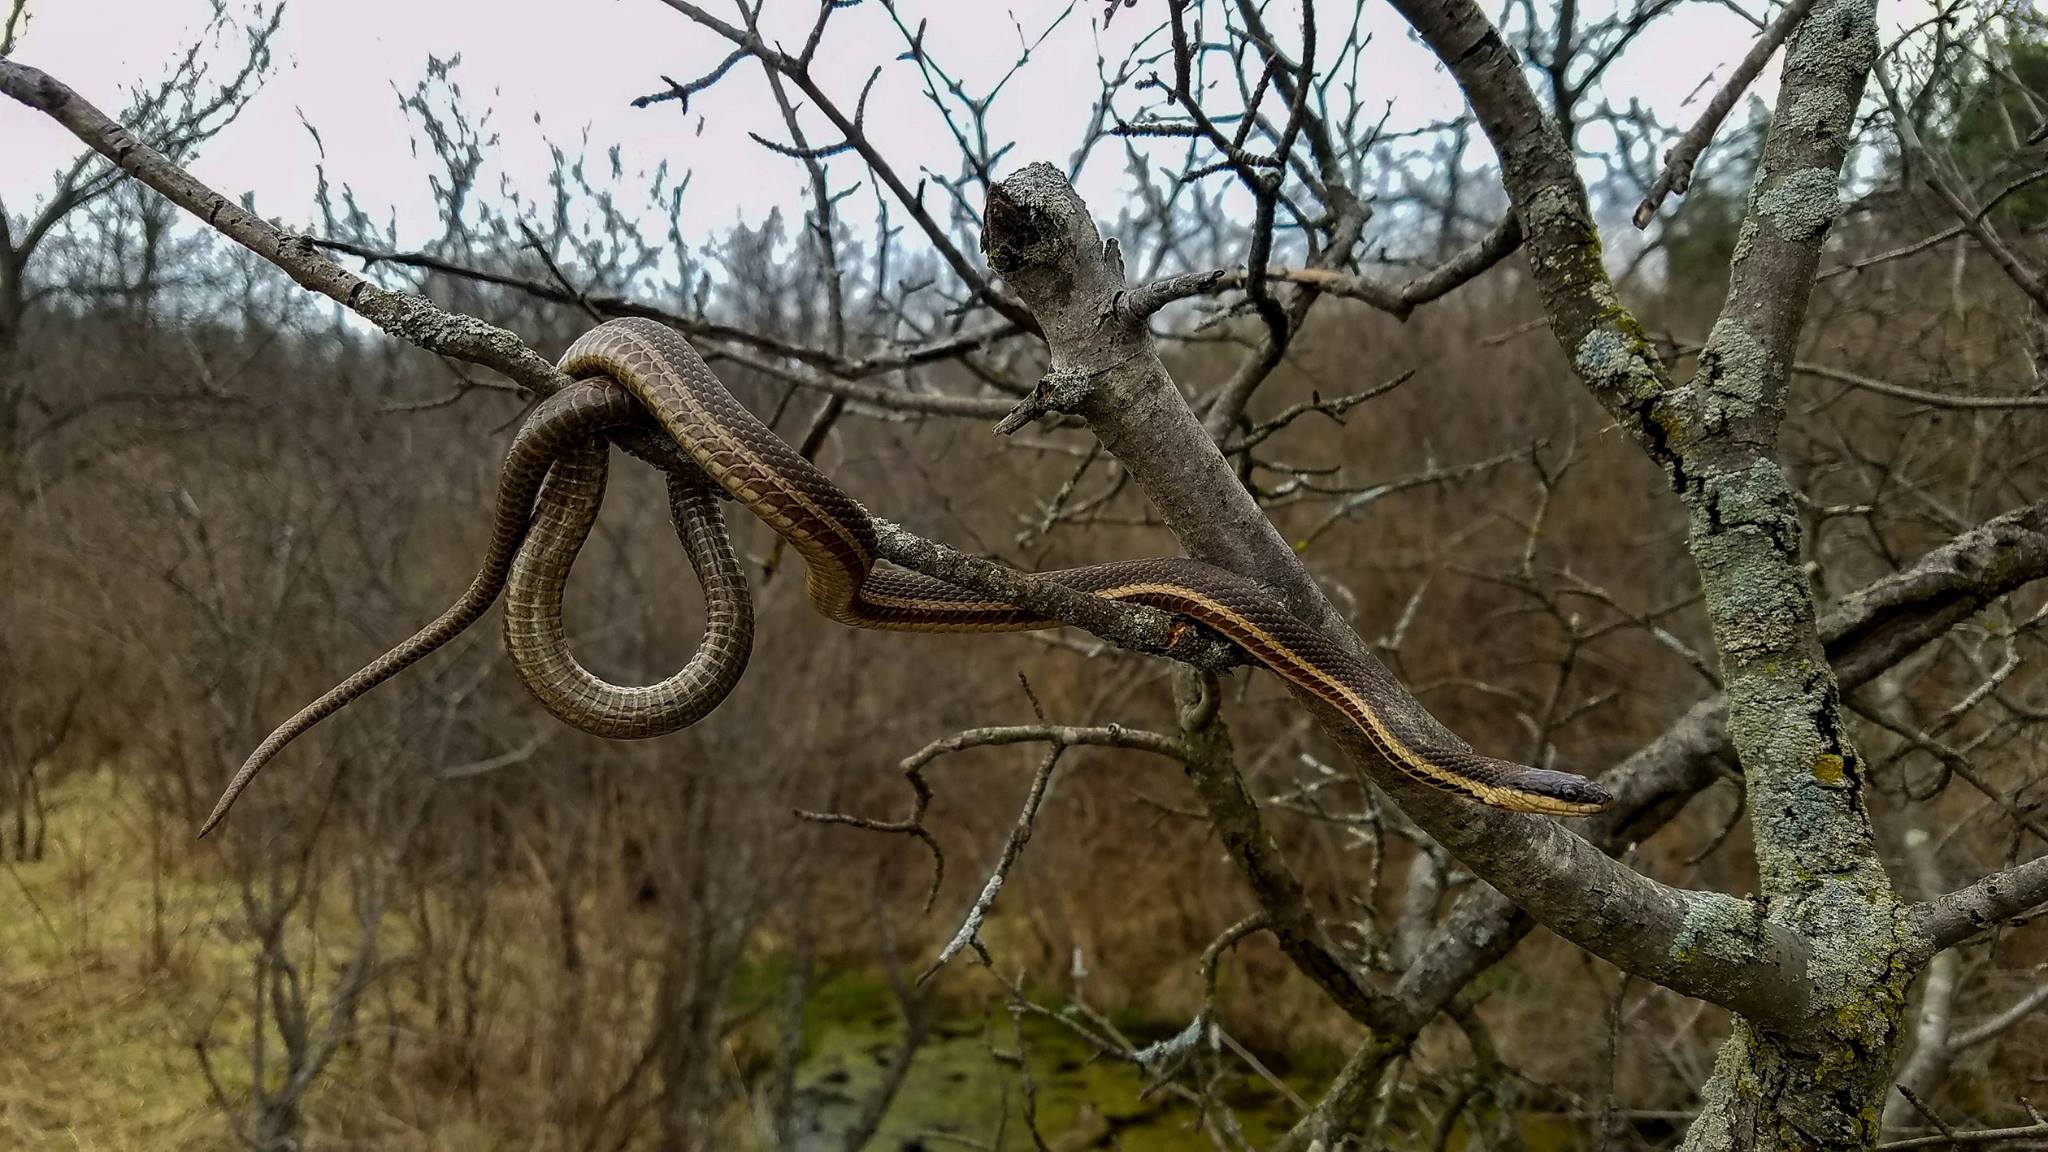 A queen snake in a tree.